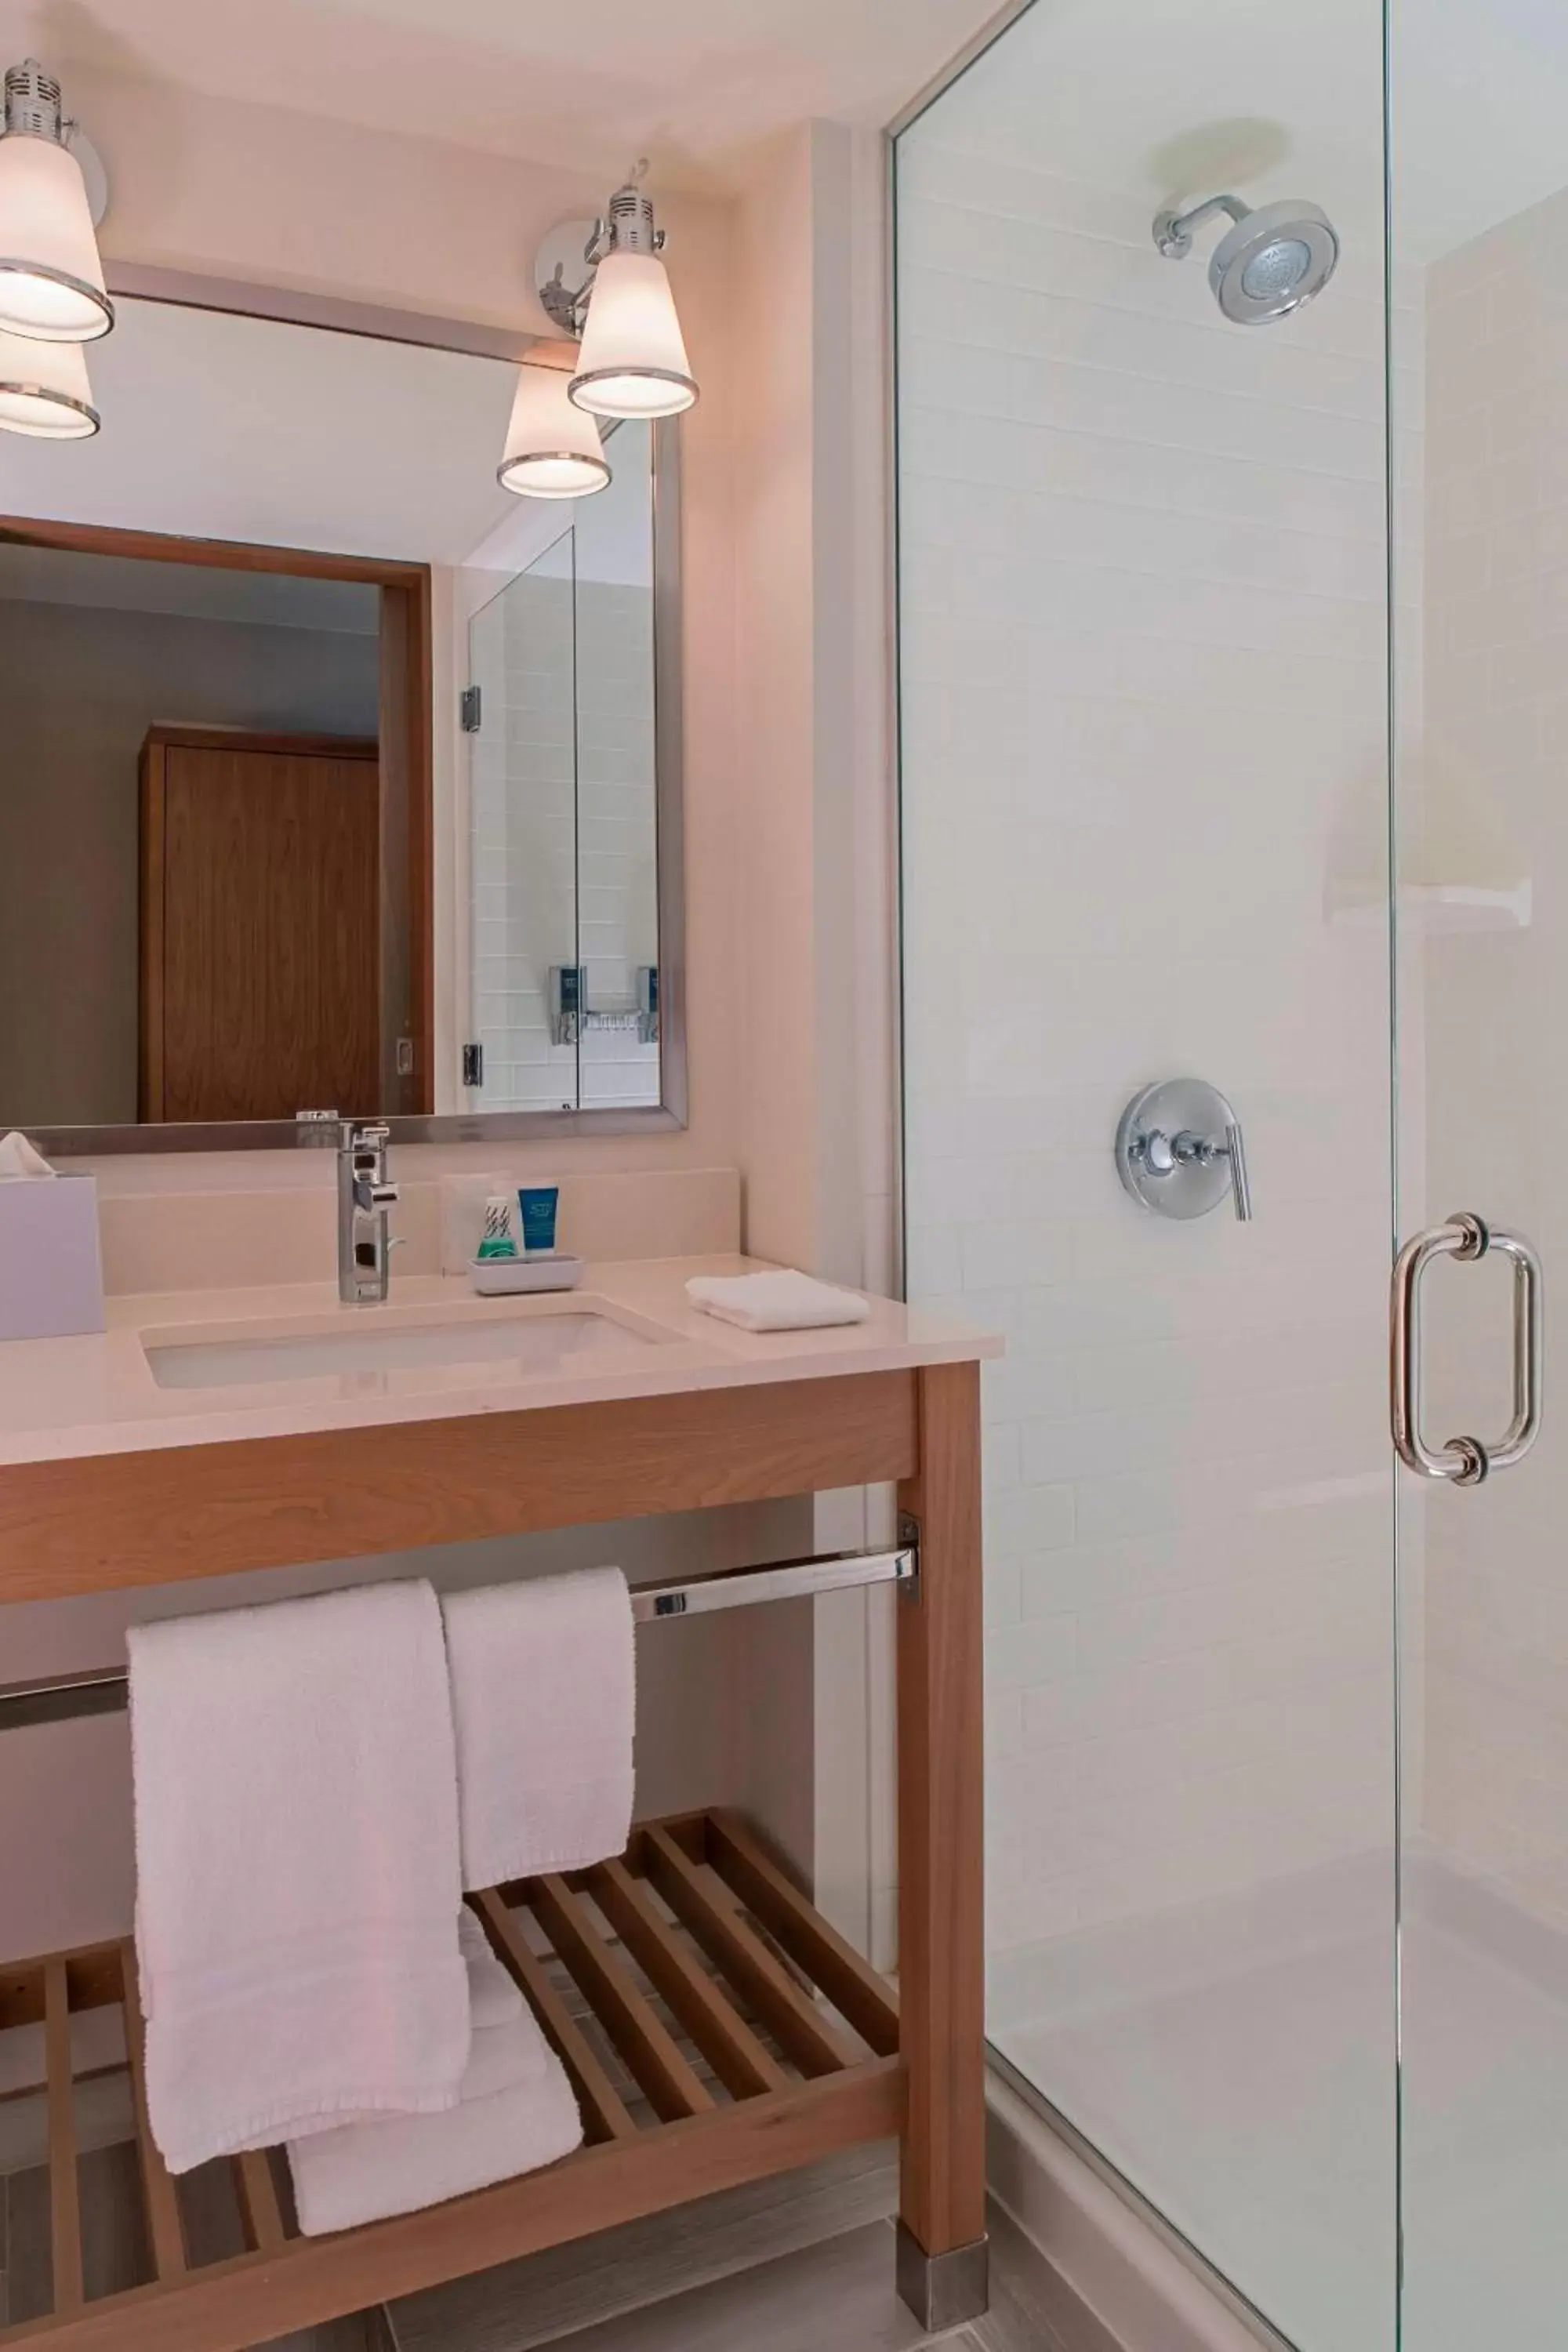 Bathroom in Four Points by Sheraton Midland